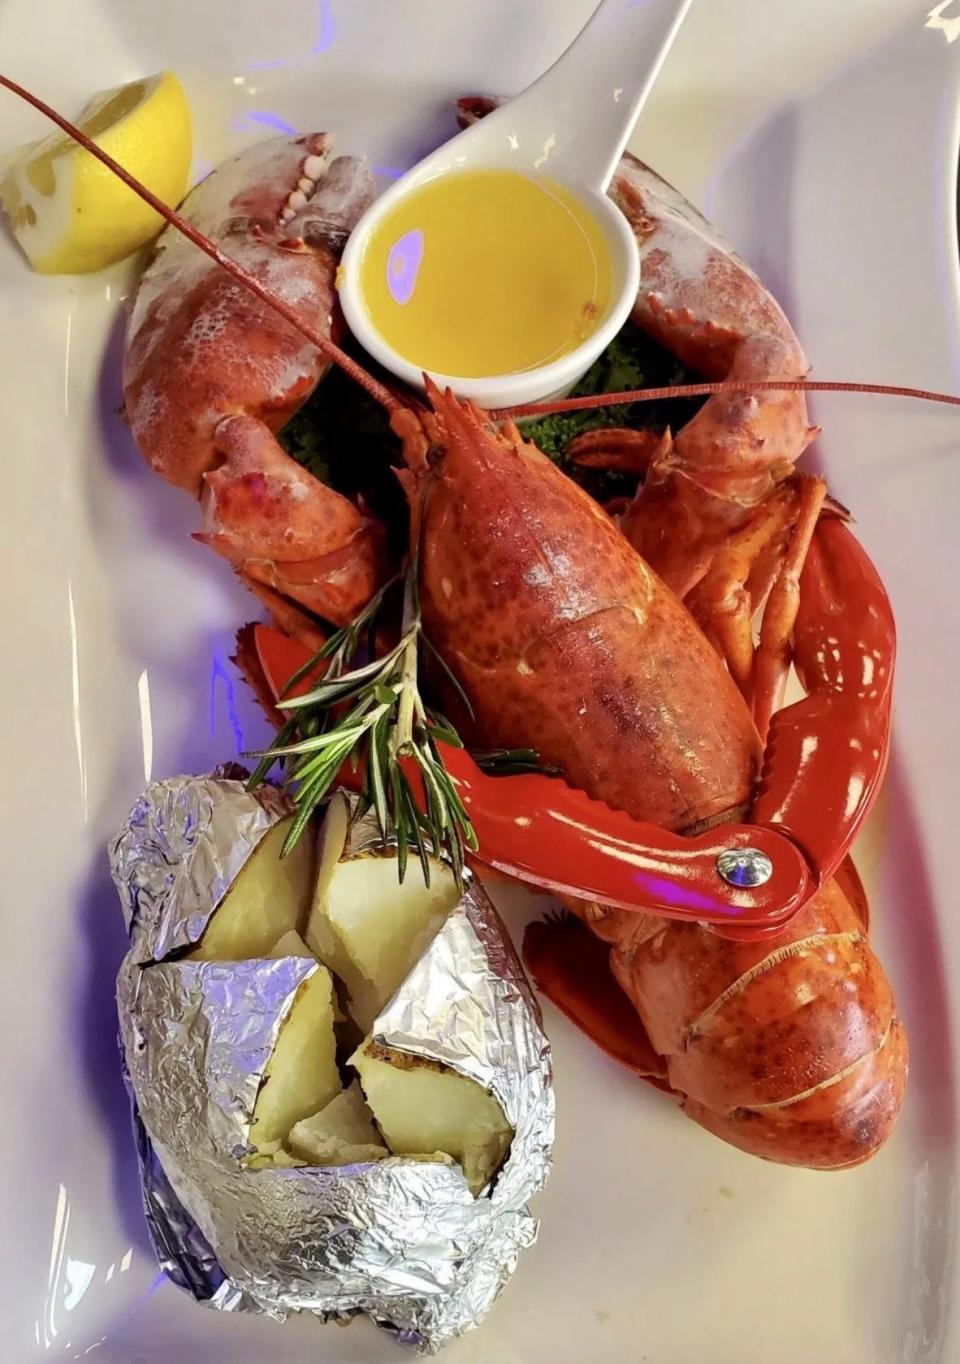 American Lobster in Wind Gap serves lobster, mussels and other staple seafood dishes.